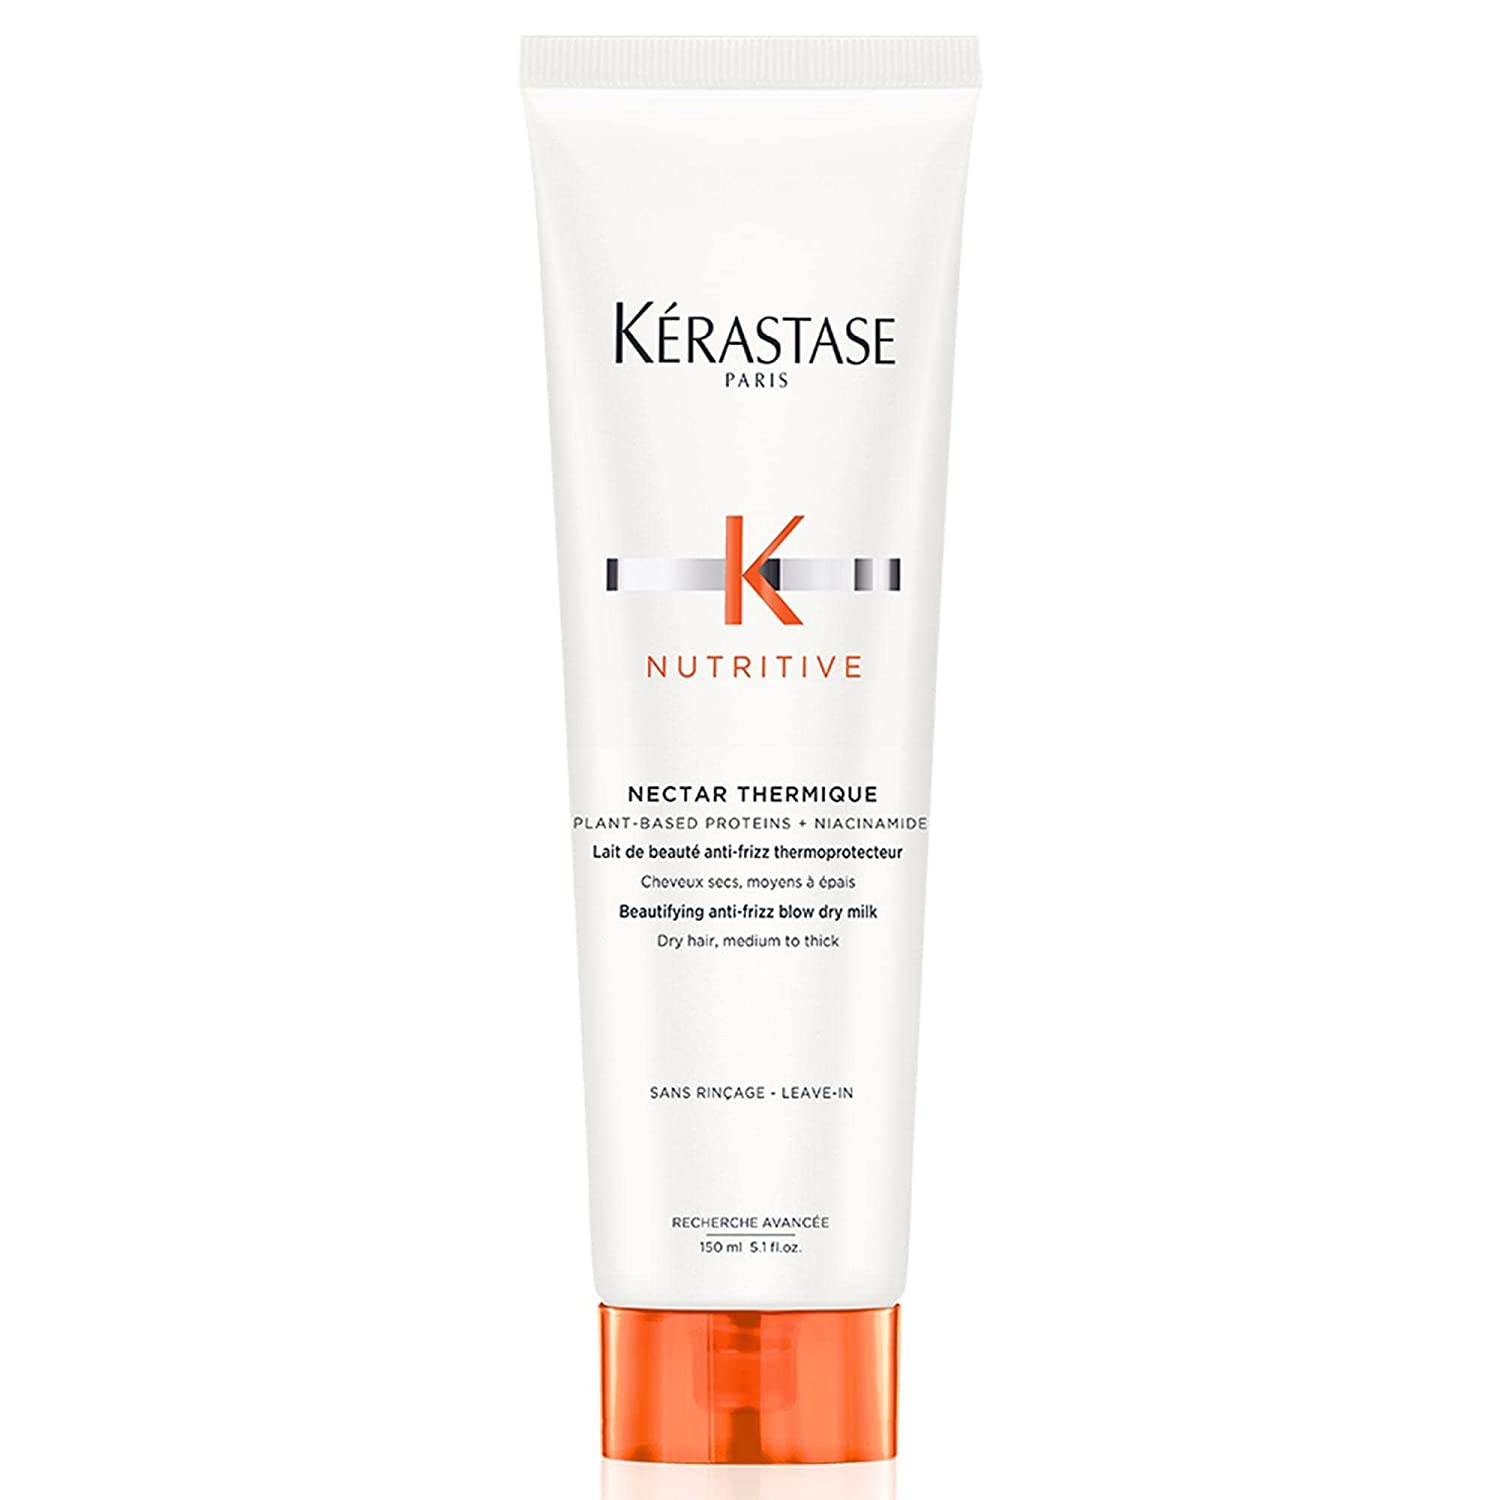 Kérastase Nutritive Nourishing Heat Protection for Dry, Fine to Medium Hair, For More Shine and Softness, Nectar Thermique Beautifying Anti-Frizz Blow Dry Milk, Nutritive, 150 ml